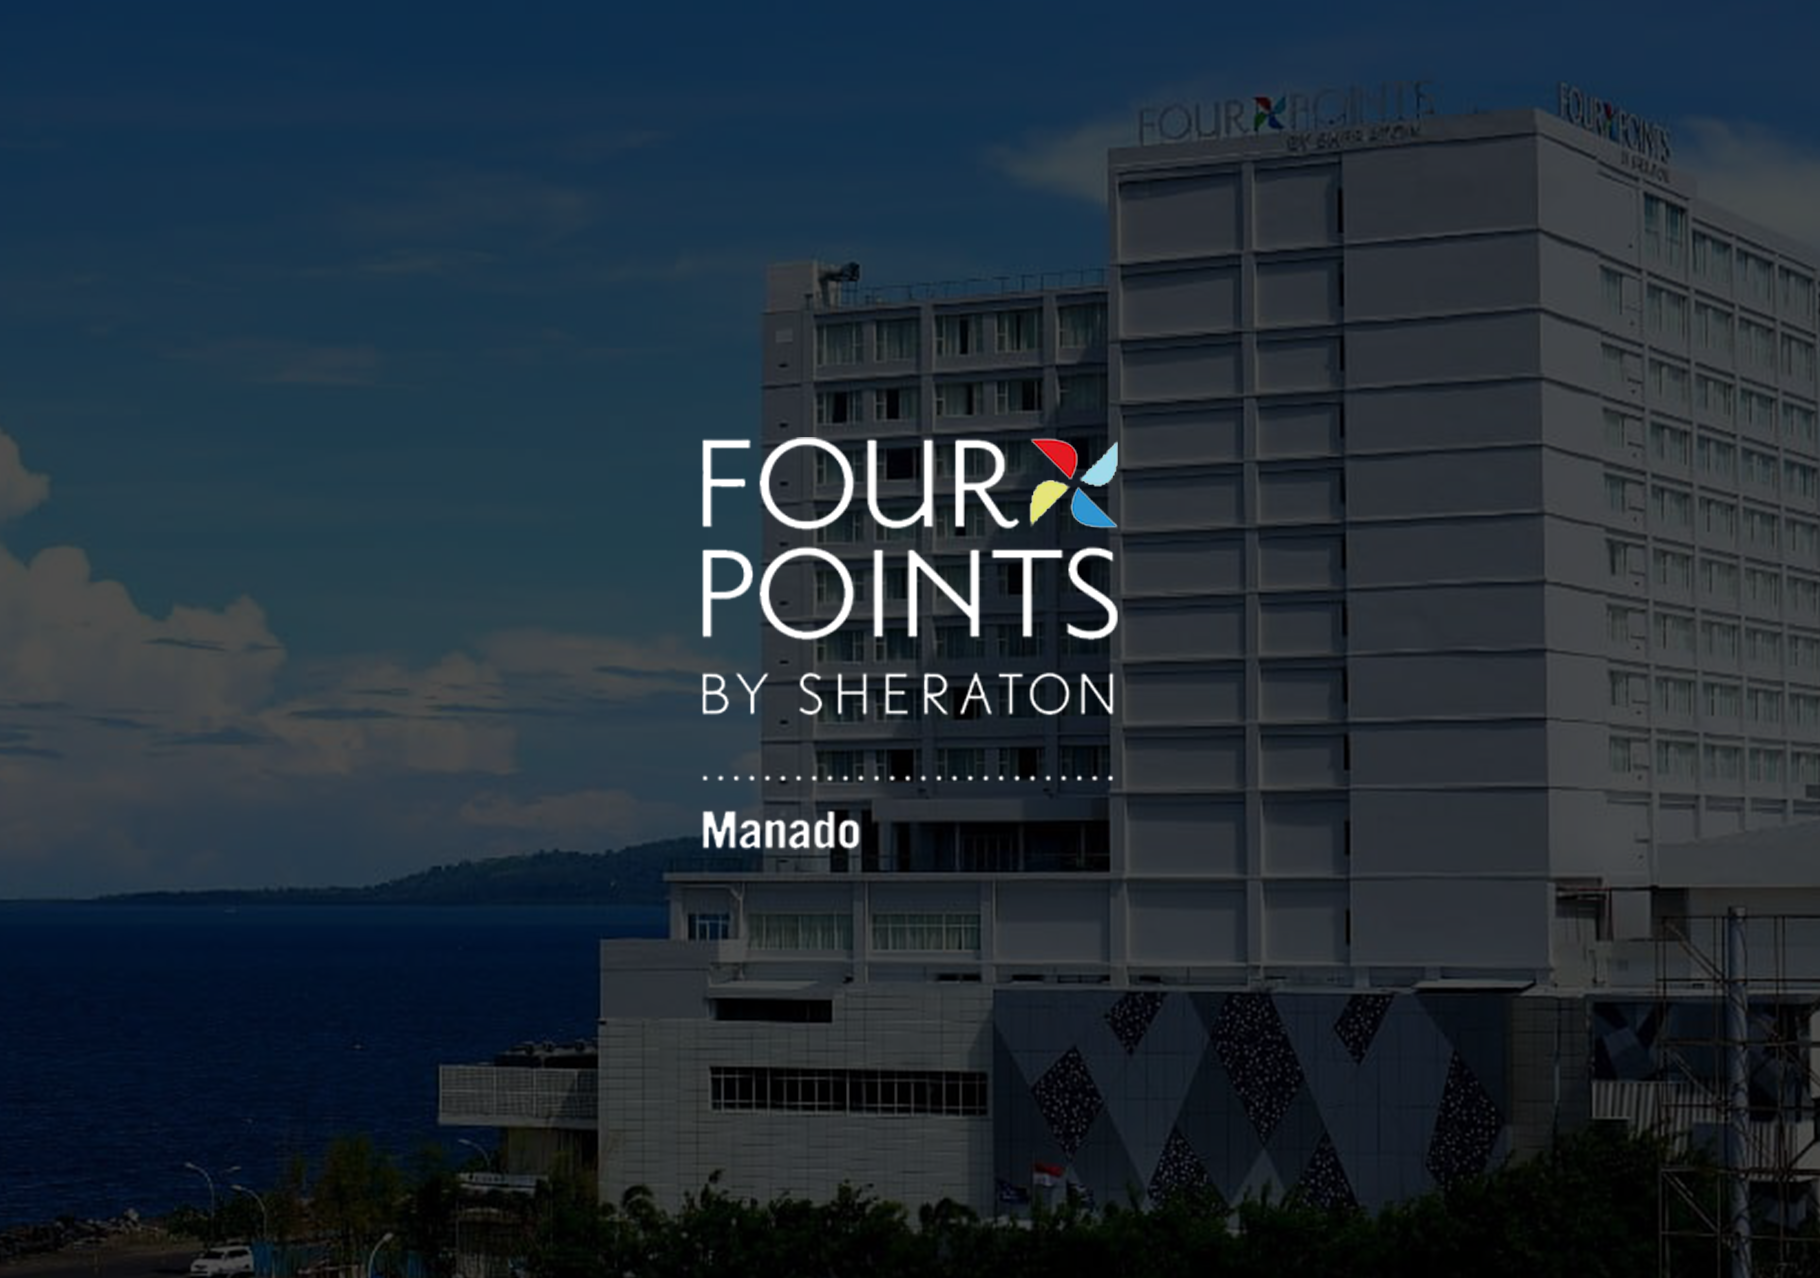 FOUR POINTS MANADO - Branding & advertising production house